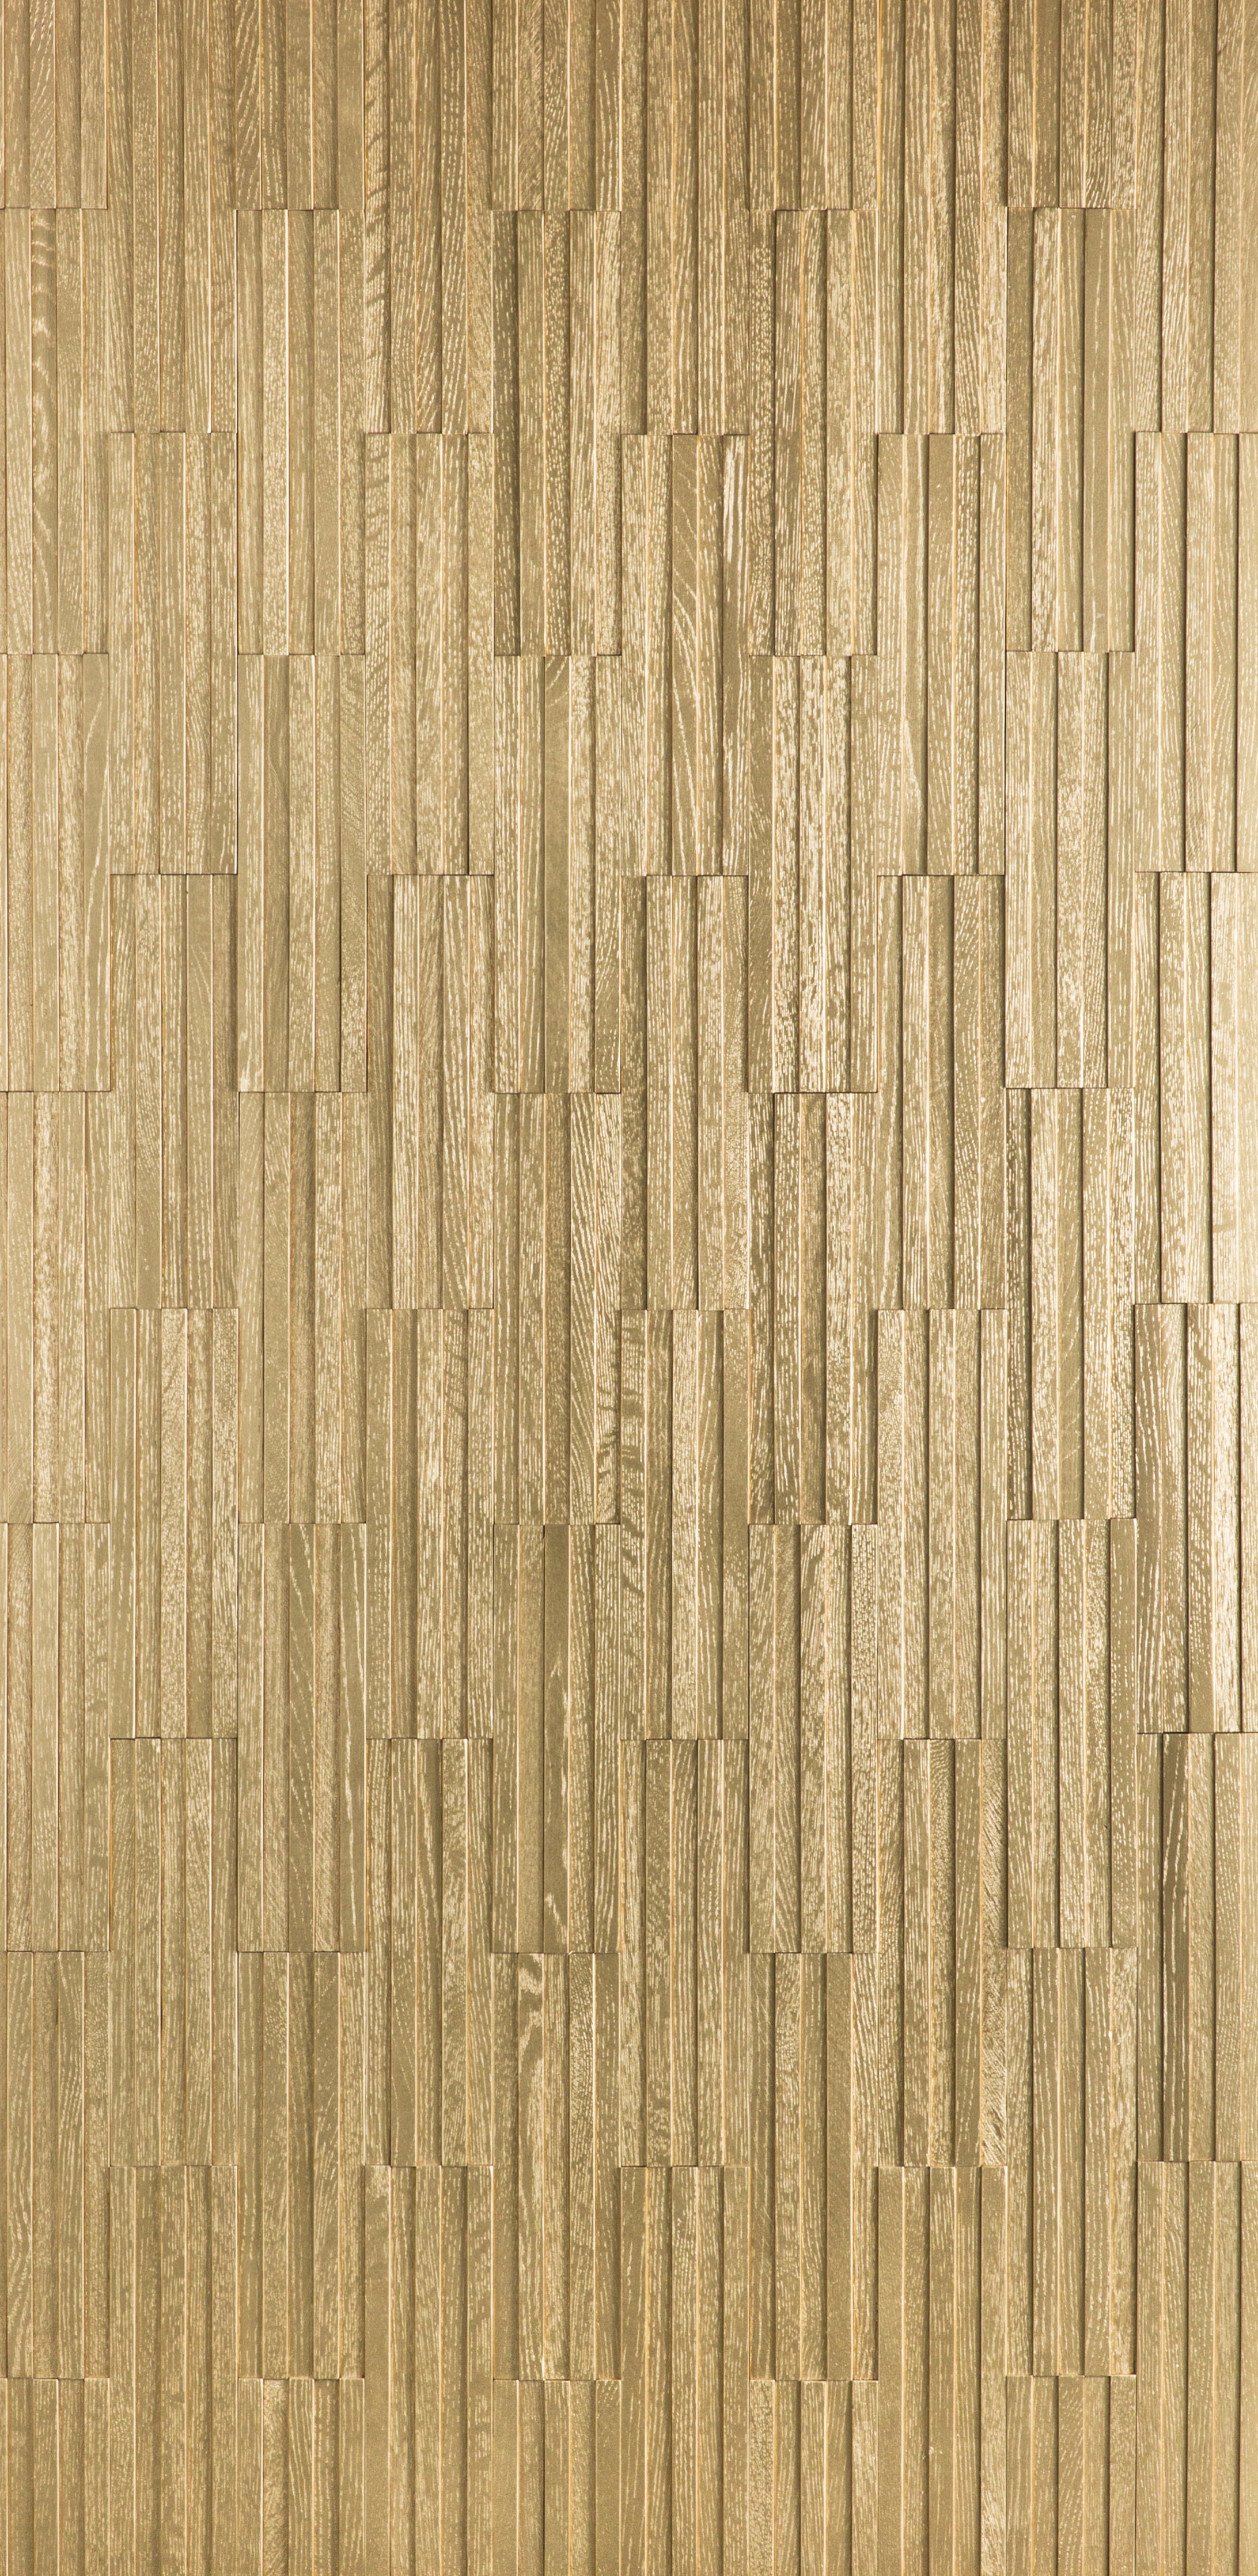 duchateau inceptiv parallels gold oak three dimensional wall natural wood panel lacquer for interior use distributed by surface group international